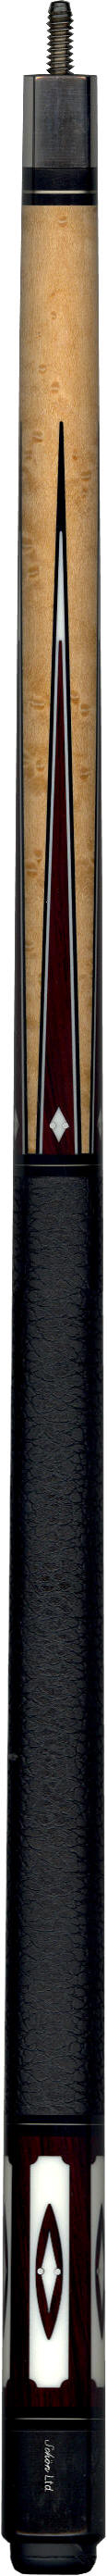 Schon LTD 2207 Pool Cue with Leather Wrap